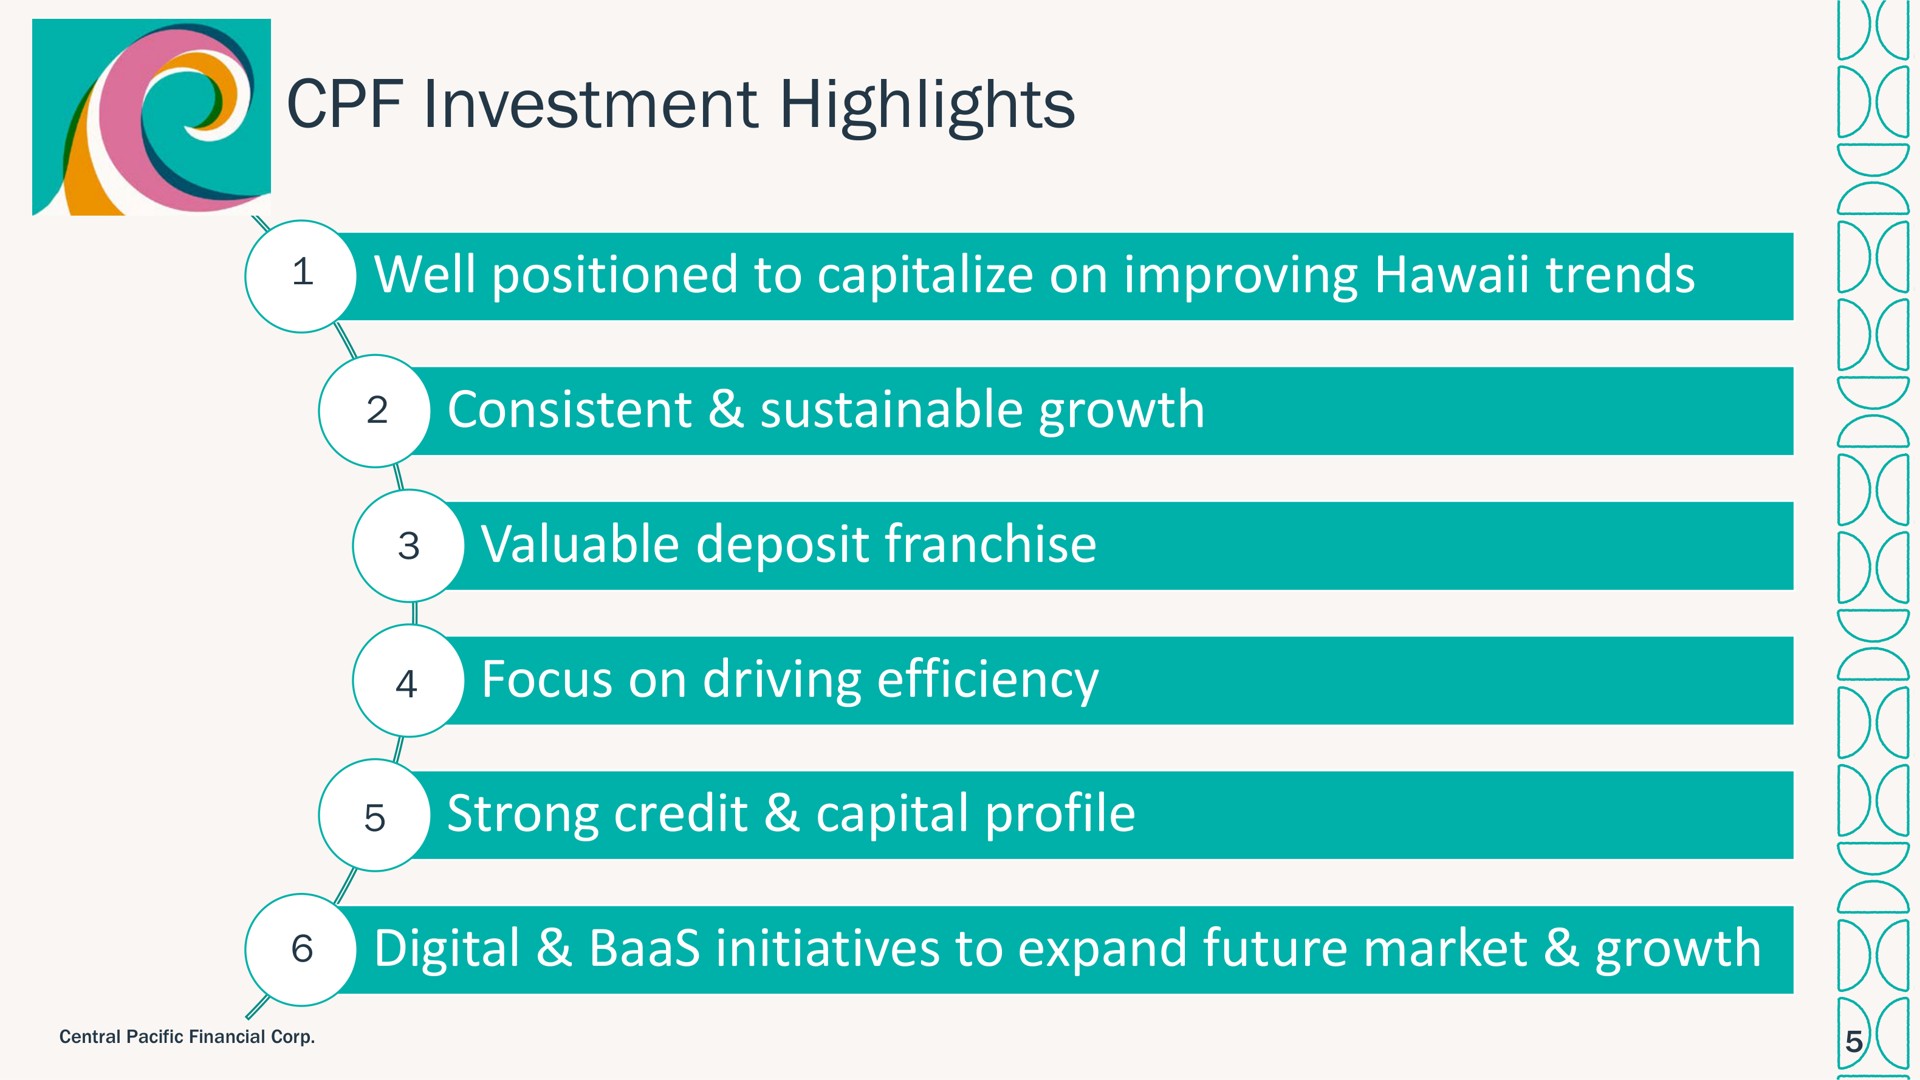 investment highlights well positioned to capitalize on improving trends consistent sustainable growth valuable deposit franchise focus on driving efficiency strong credit capital profile digital baas initiatives to expand future market growth | Central Pacific Financial